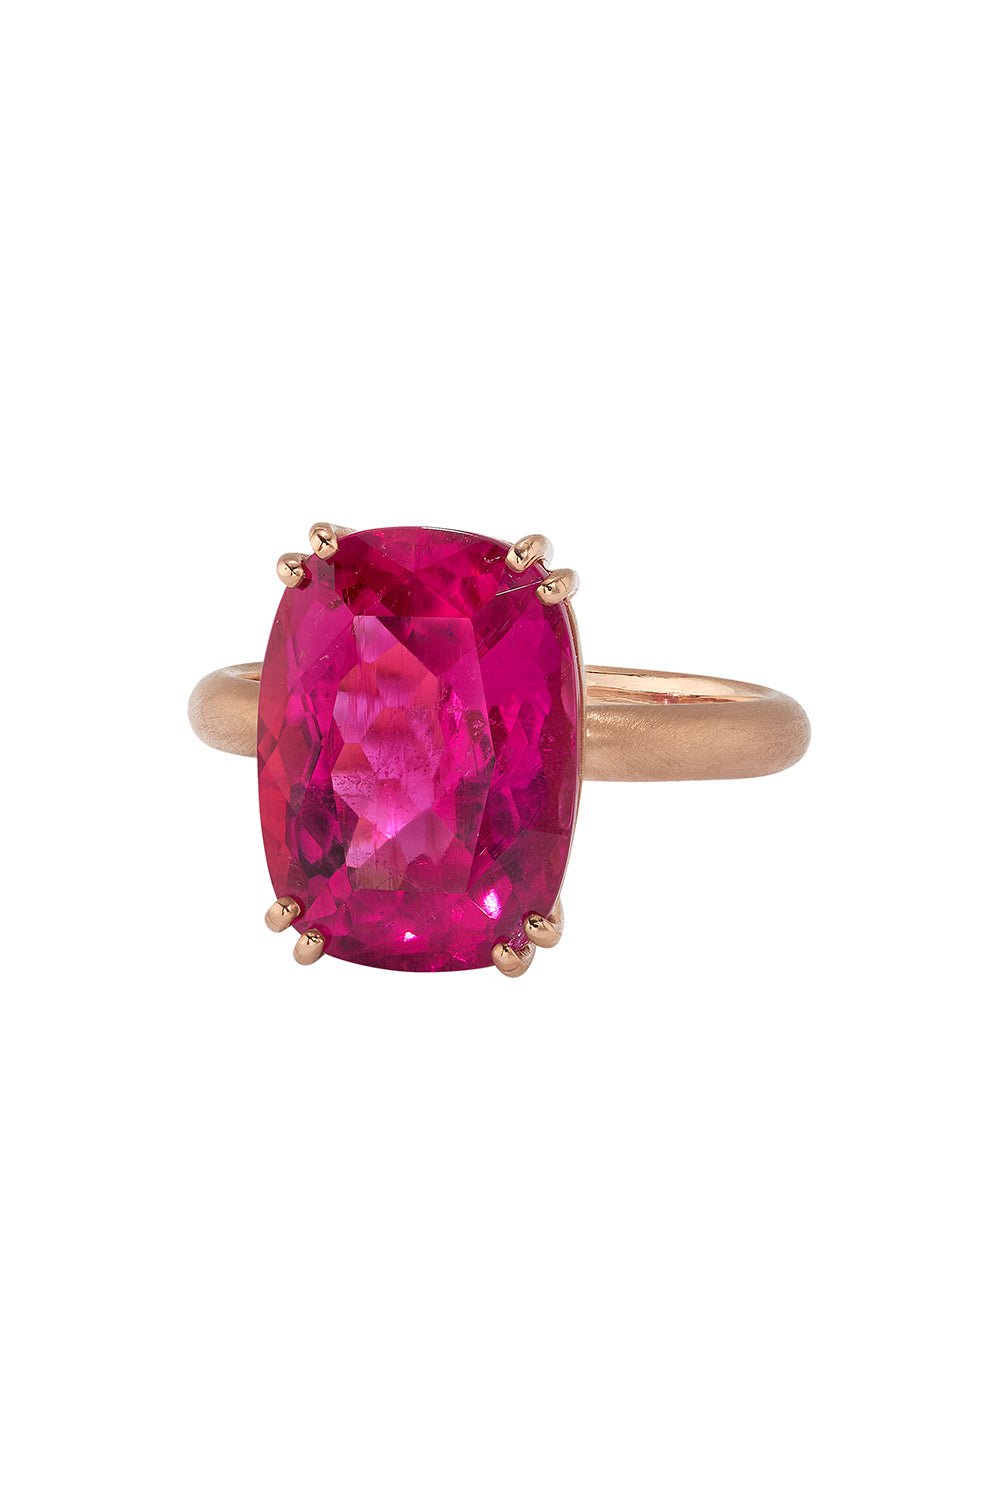 IRENE NEUWIRTH JEWELRY-Gemmy Gem Double Prong Ring-ROSE GOLD